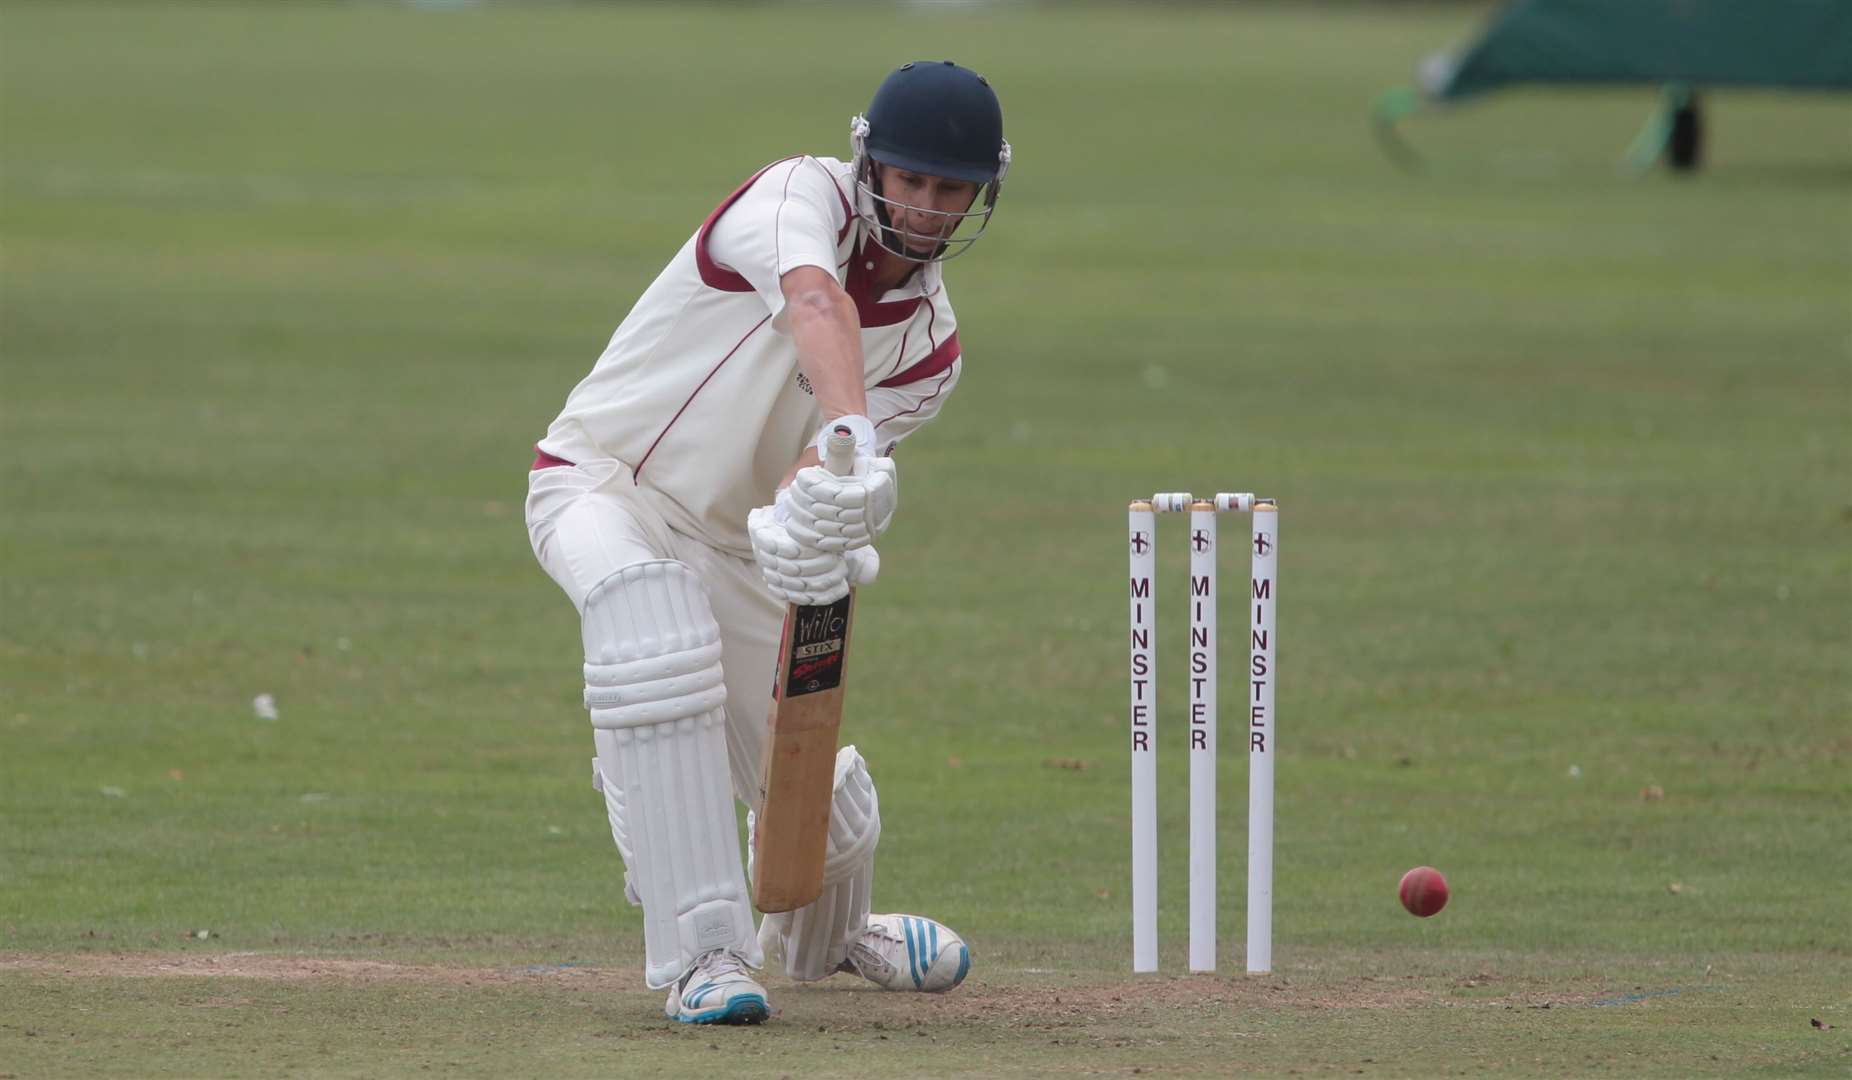 Julius Cowdrey bats for Minster against Catford at Minster Cricket Club Picture: John Westhrop